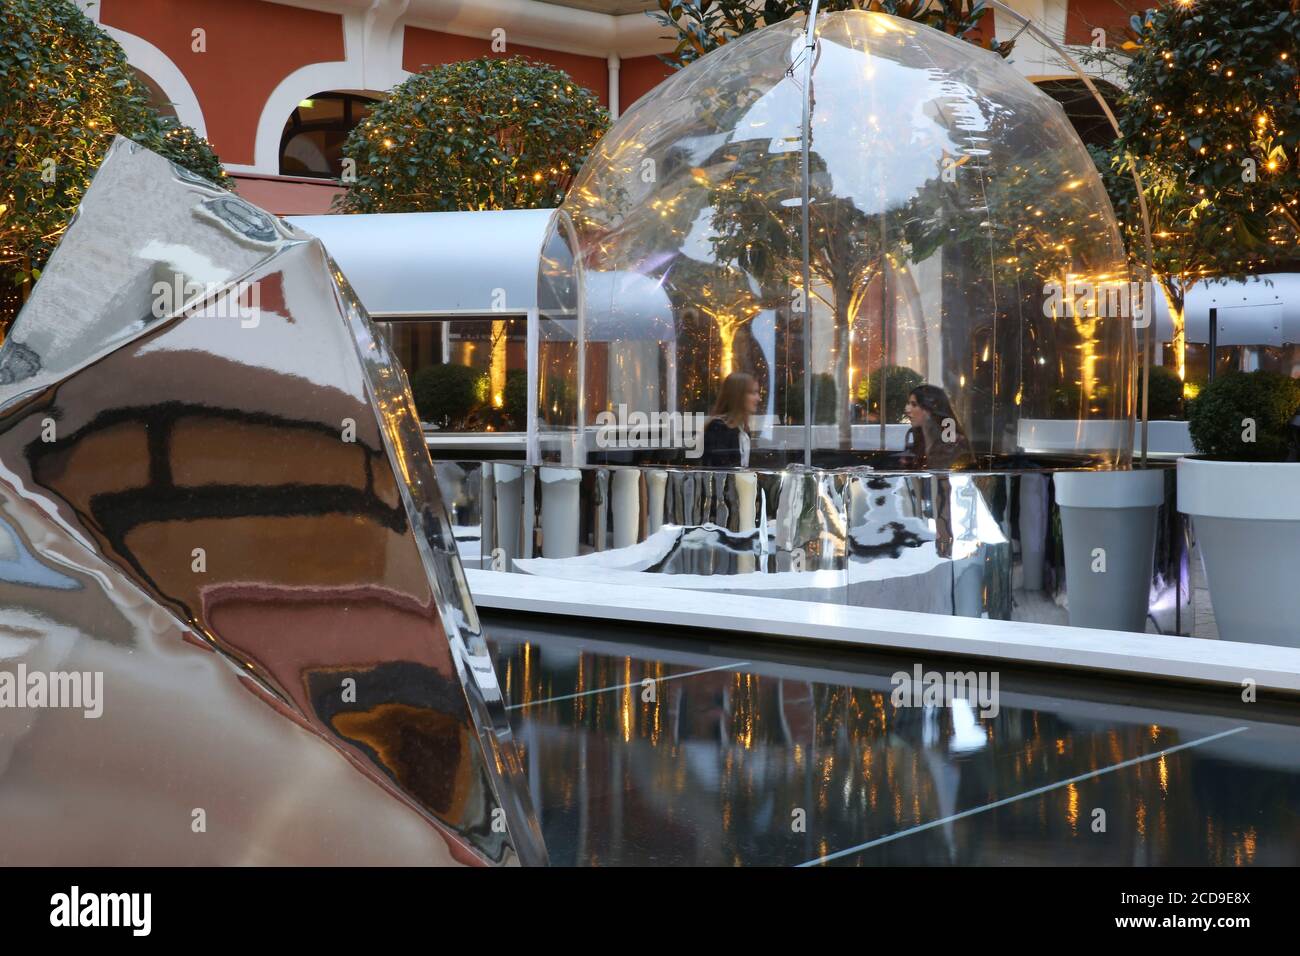 France, Paris, Royal Monceau hotel, ephemeral design ice floes on the terrace of the Royal Monceau Stock Photo